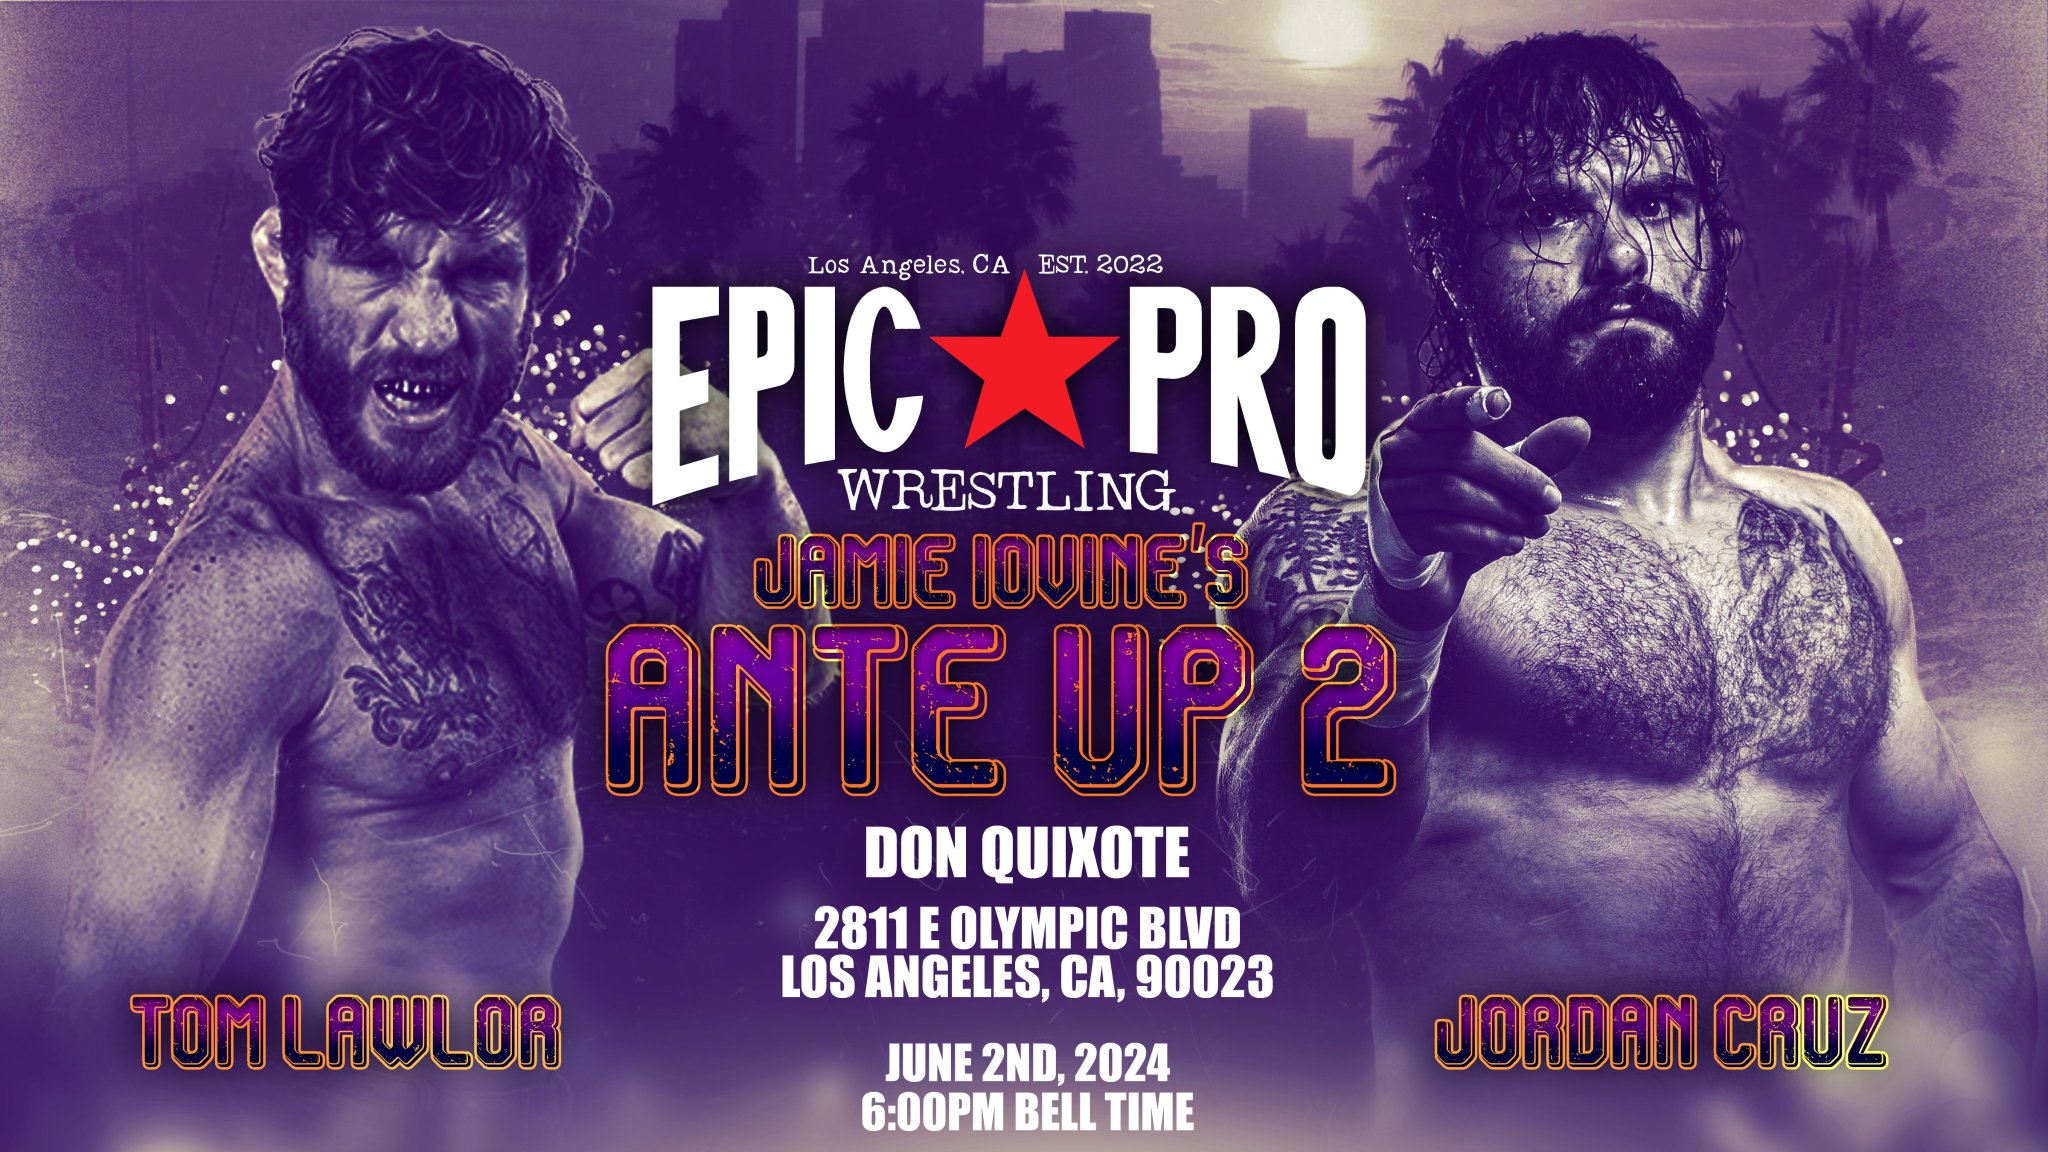 Press Release: Epic Pro Wrestling and Jamie Iovine present Ante Up 2 in Los Angeles, CA on June 2nd